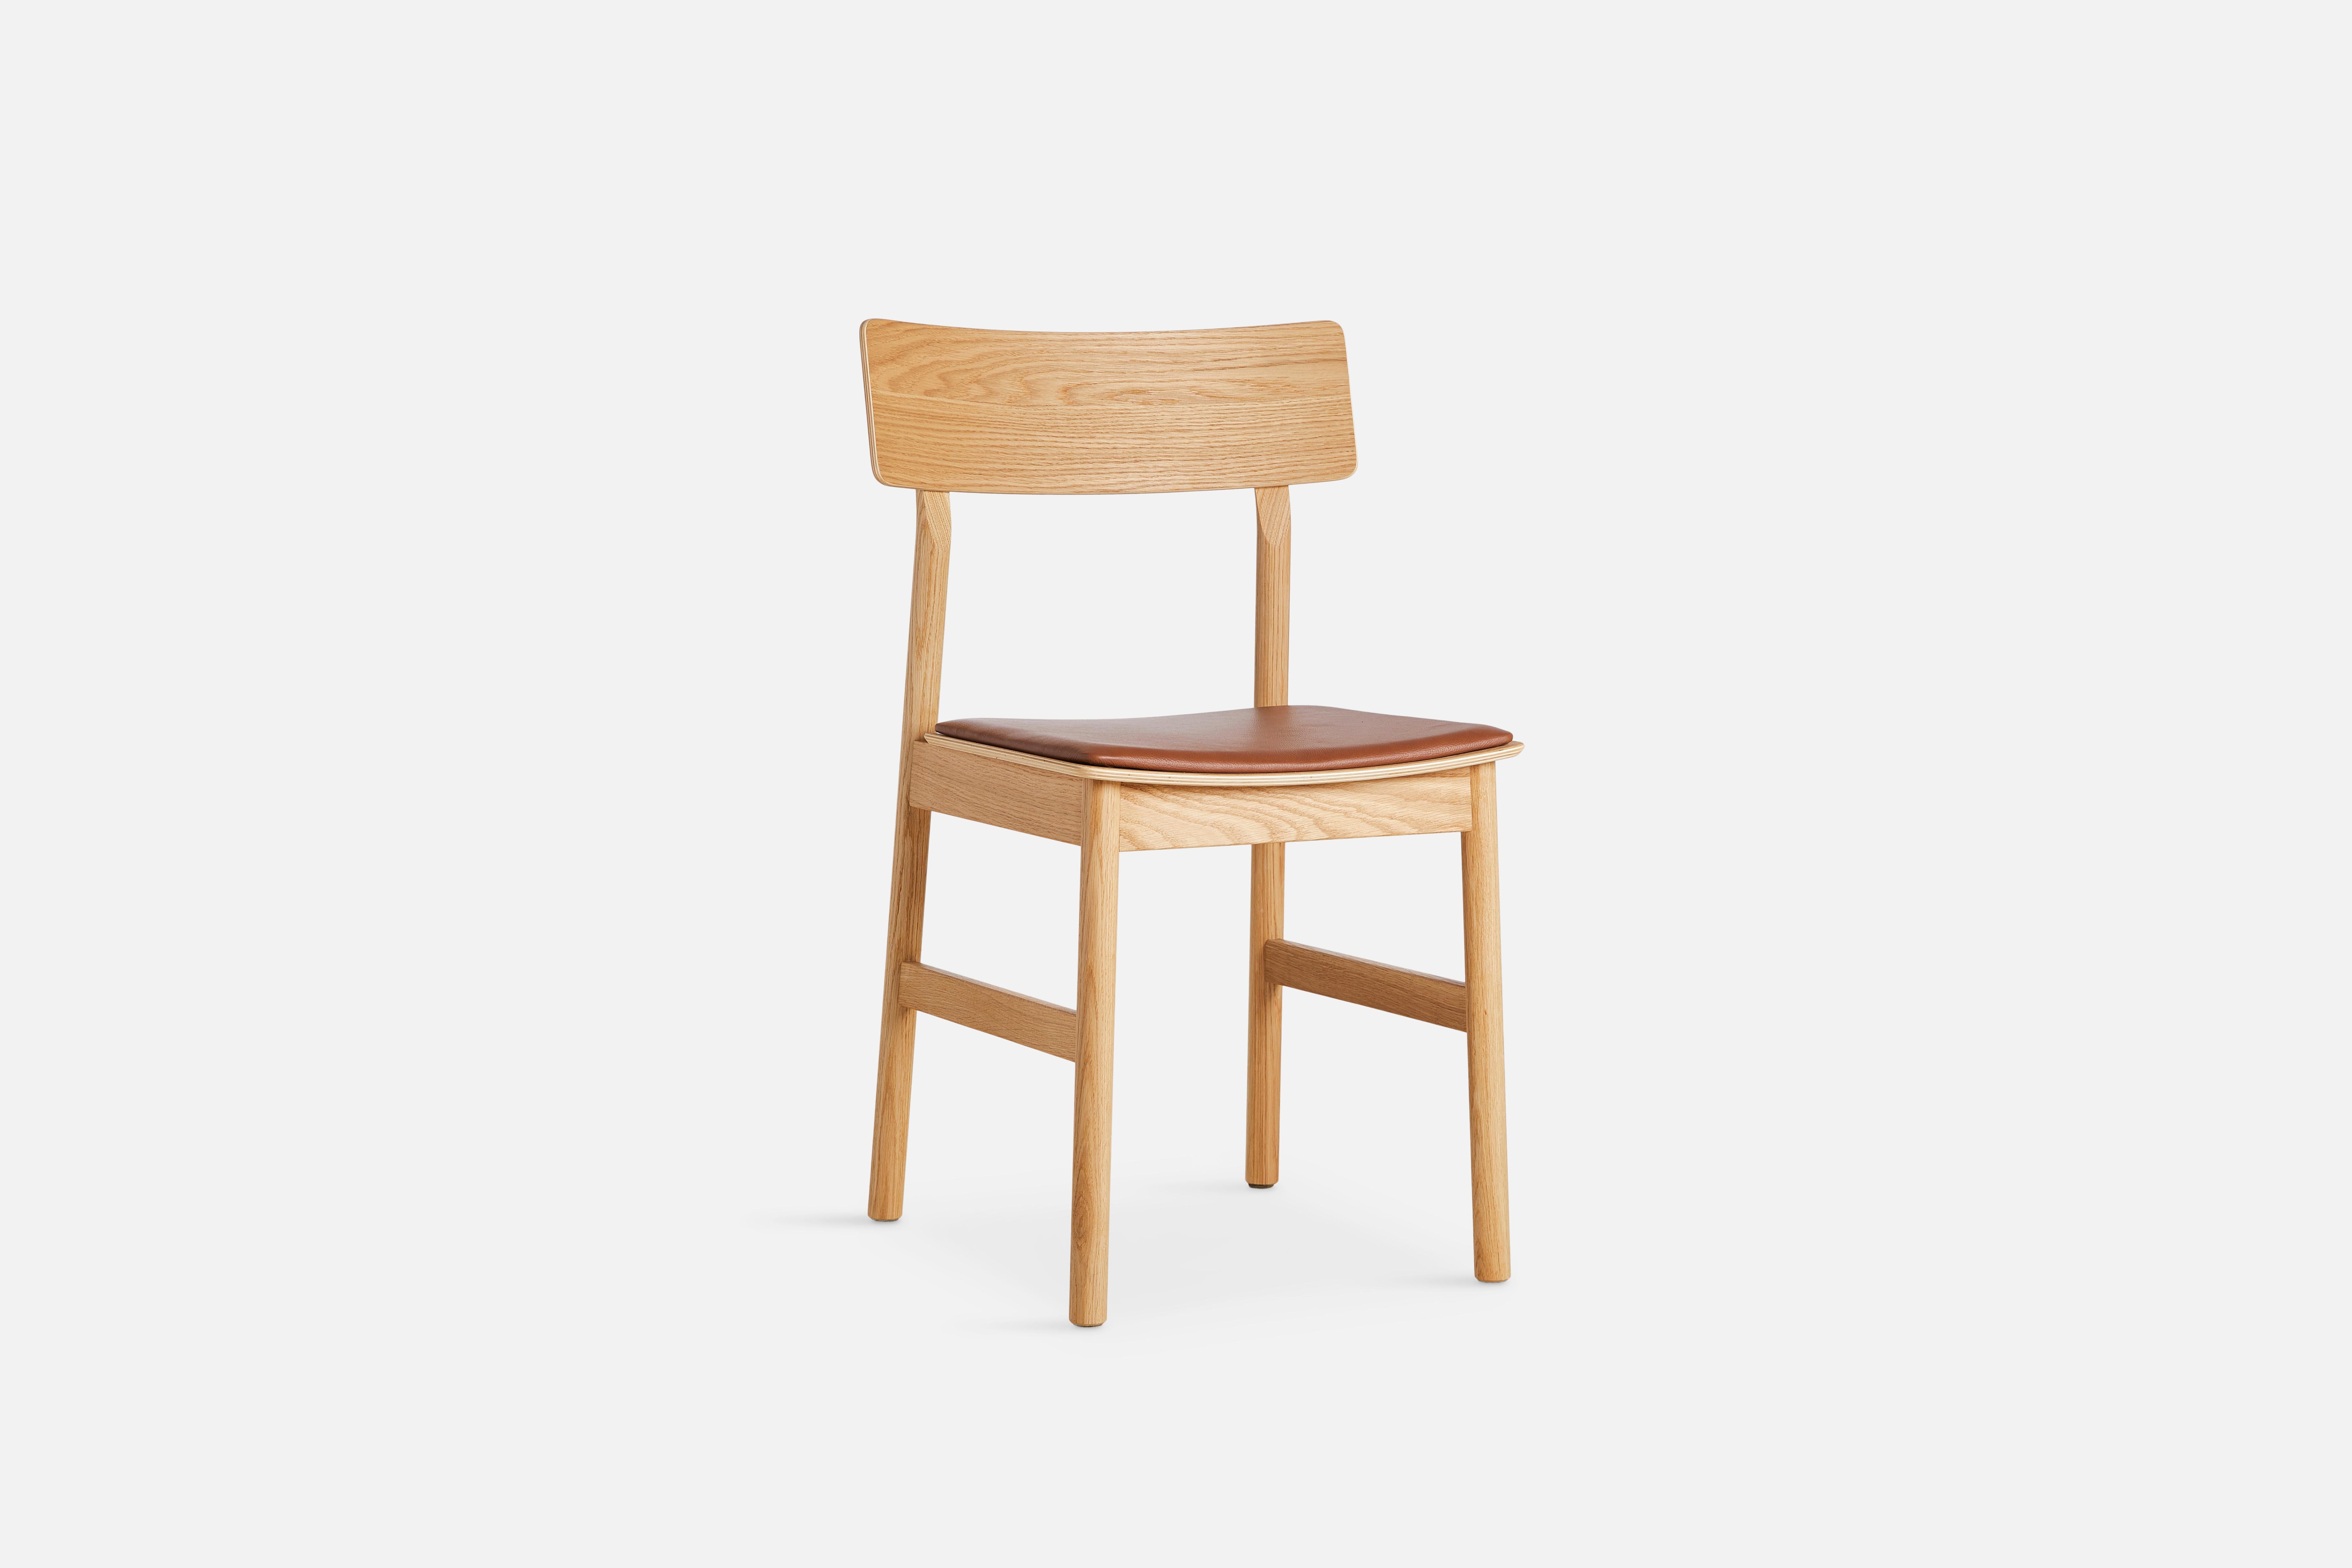 Pause oiled oak dining chair 2.0 with leather seat by Kasper Nyman.
Materials: ash, plywood, leather, upholstery.
Dimensions: D 47 x W 48 x H 80 cm.
Also available in different colours and finishes.

The founders, Mia and Torben Koed, decided